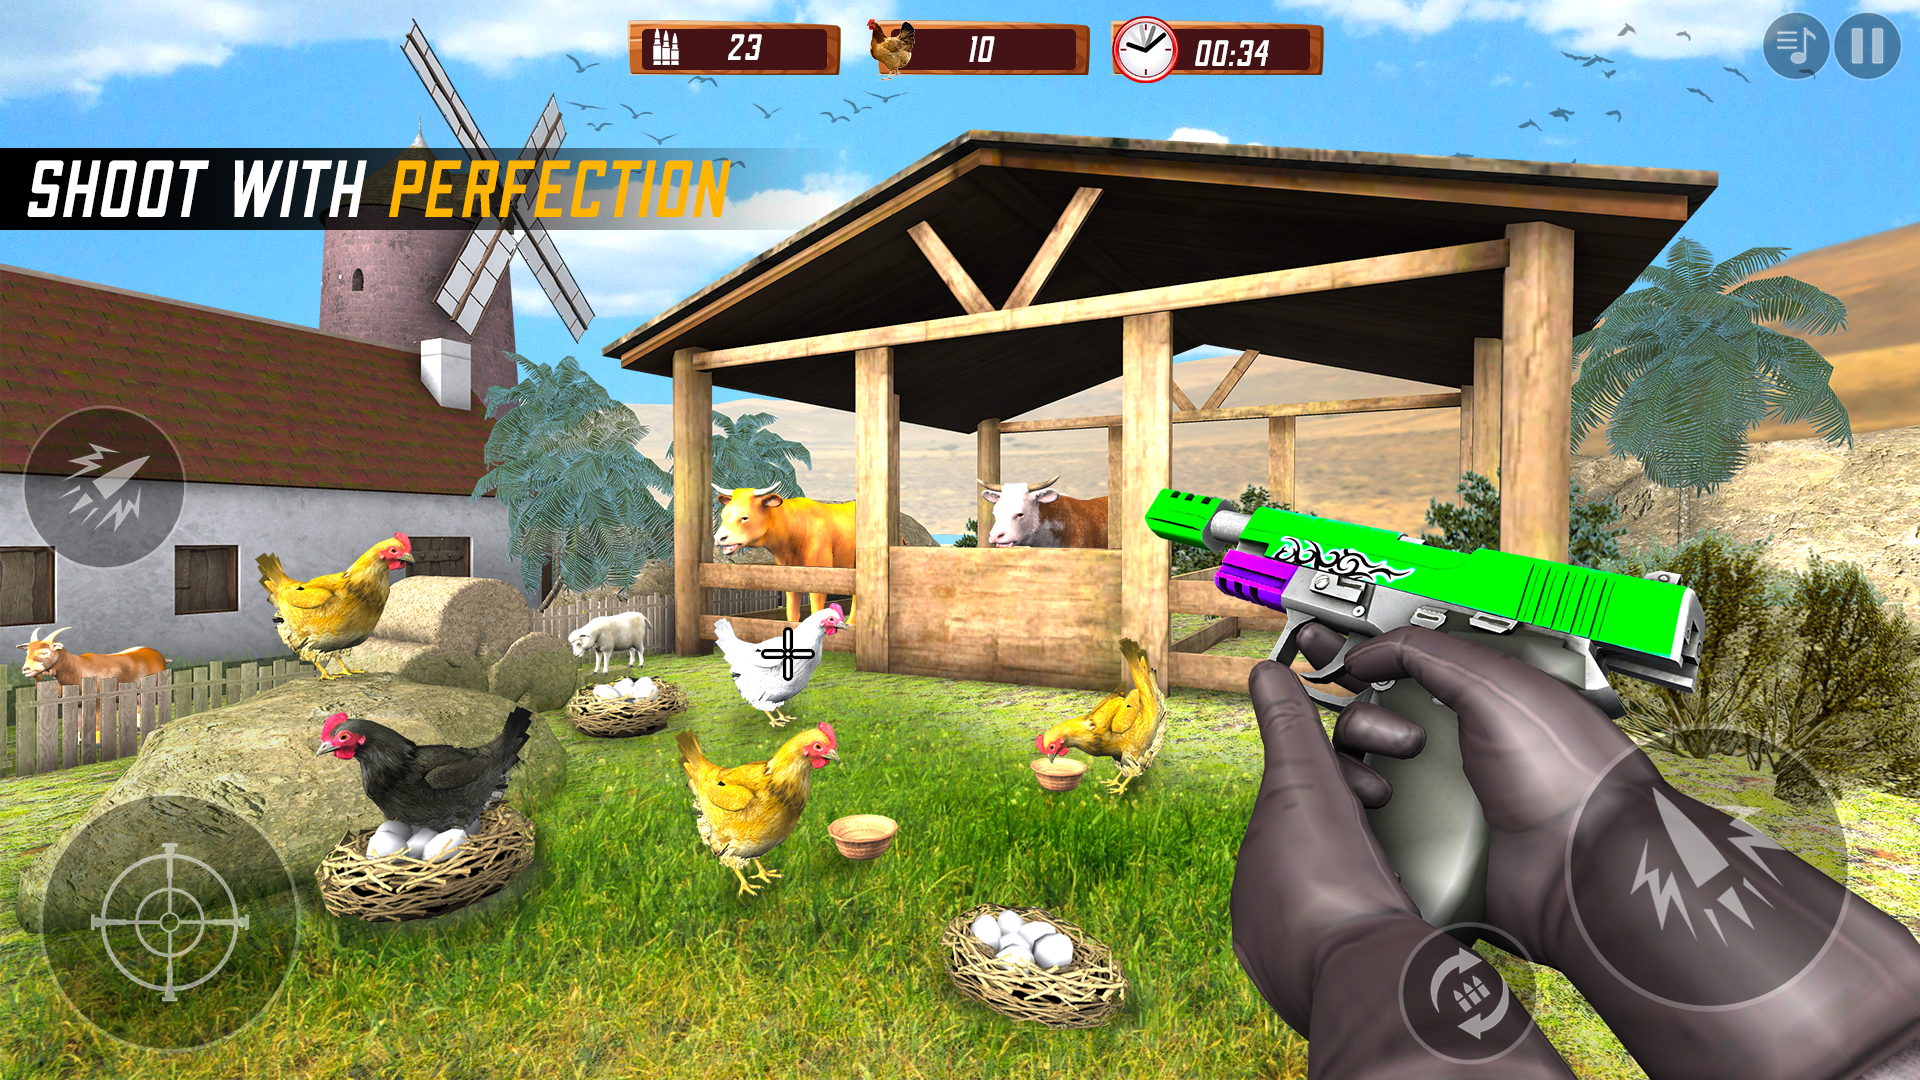 Chicken fps shoot Gun 3D APK (Android Game) - Free Download